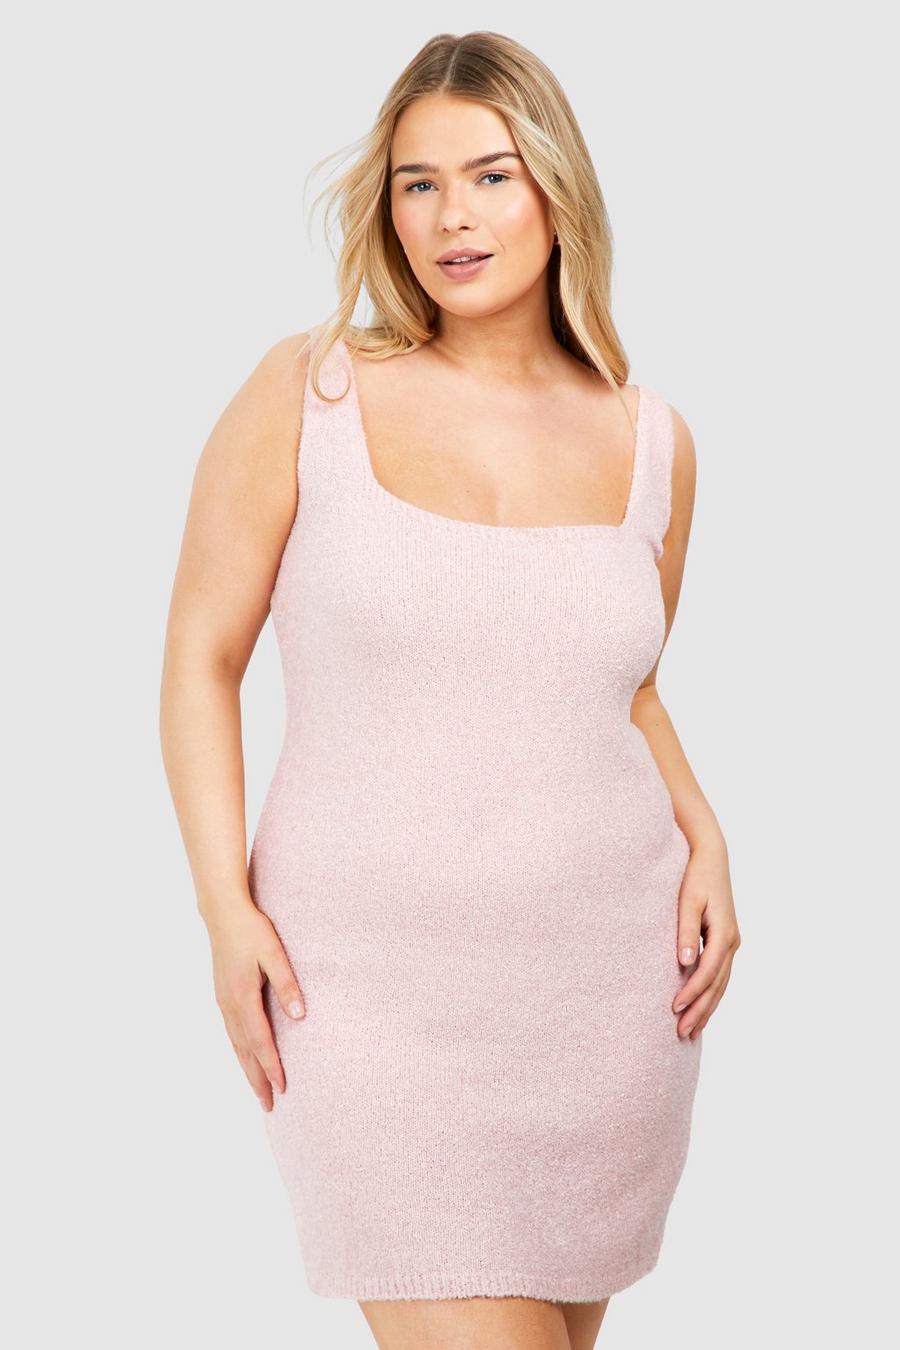 Grande taille - Robe courte à col carré, Baby pink image number 1